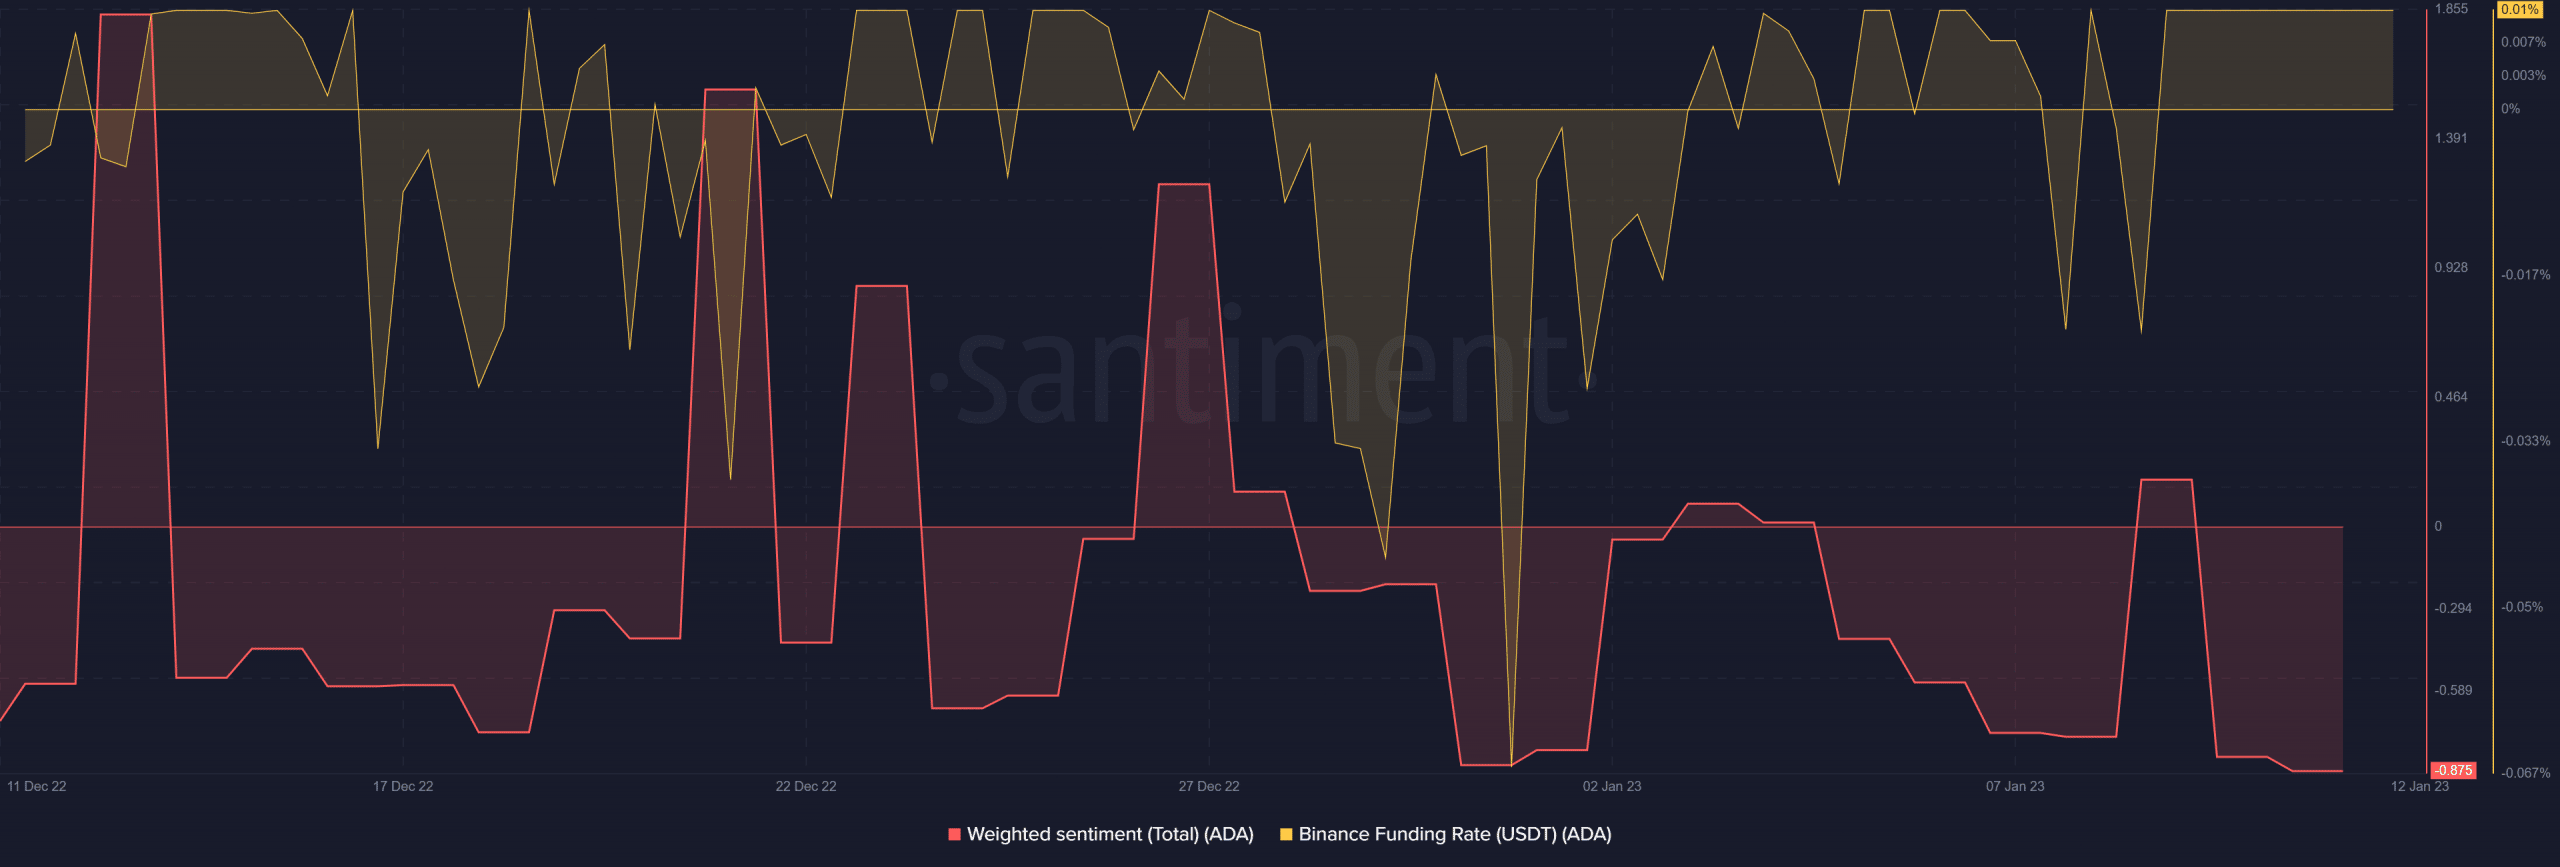 ADA Binance funding rate and weighted sentiment